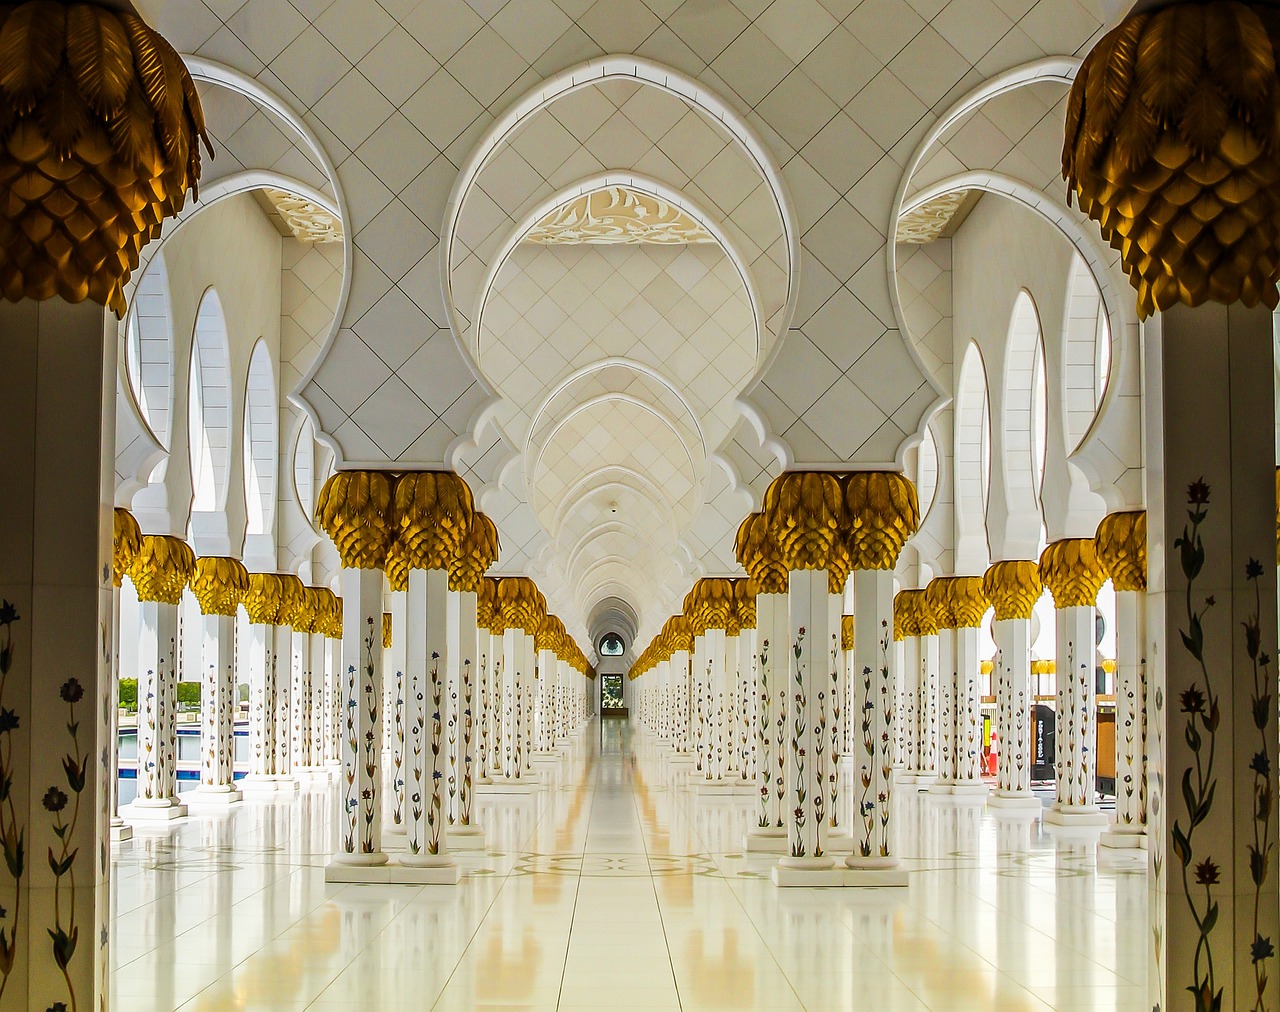 the inside of a large white and gold building, by Sheikh Hamdullah, shutterstock, elegant walkways between towers, 8 khd post - processing, where being rest in peace, miyamoto abduzeedo